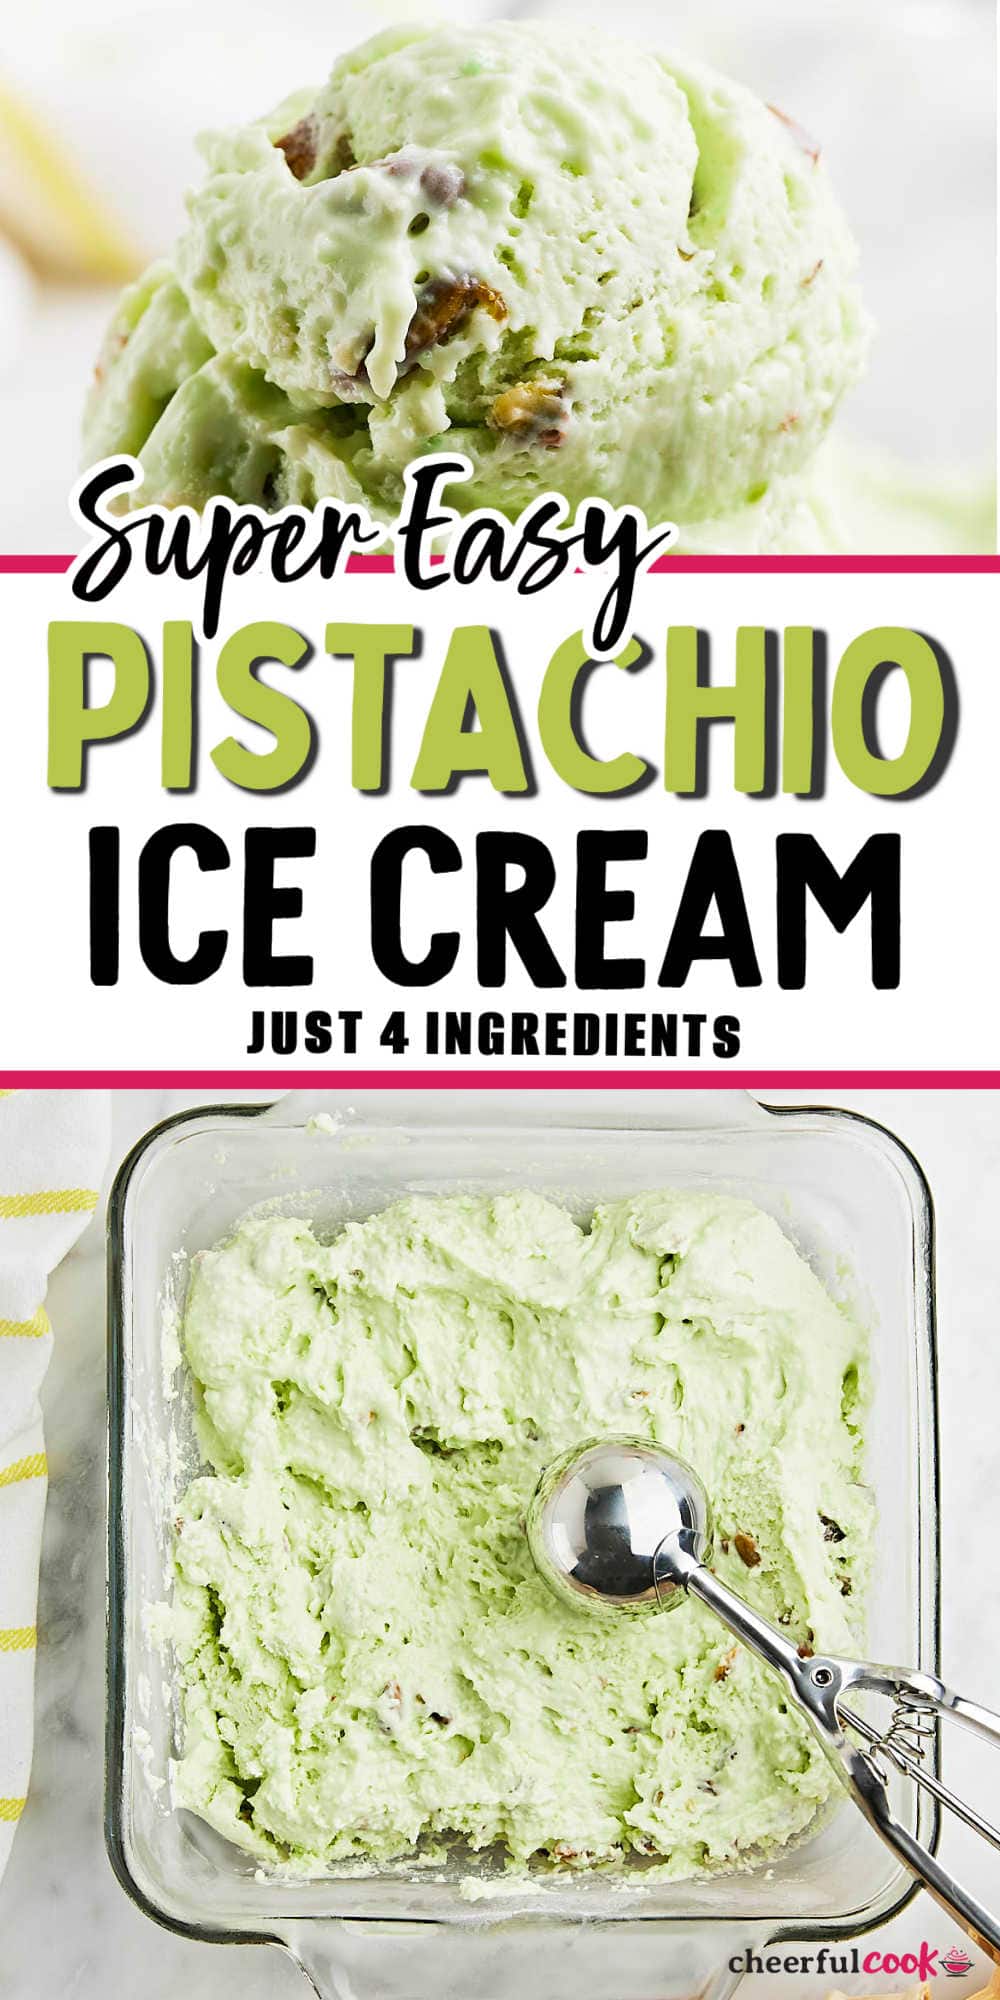 Get ready to indulge in our scrumptious homemade pistachio ice cream! 🍨🤤 Made with a creamy pistachio base, fluffy whipped cream, and crunchy salted pistachios, this dreamy dessert is perfect for satisfying your sweet tooth! 😋🌟 Grab a scoop (or two) and enjoy this delightful treat that's easy to make and even easier to love! 💚🍦 #cheerfulcook #PistachioIceCream #IceCreamLovers #condensedmilkicecream via @cheerfulcook